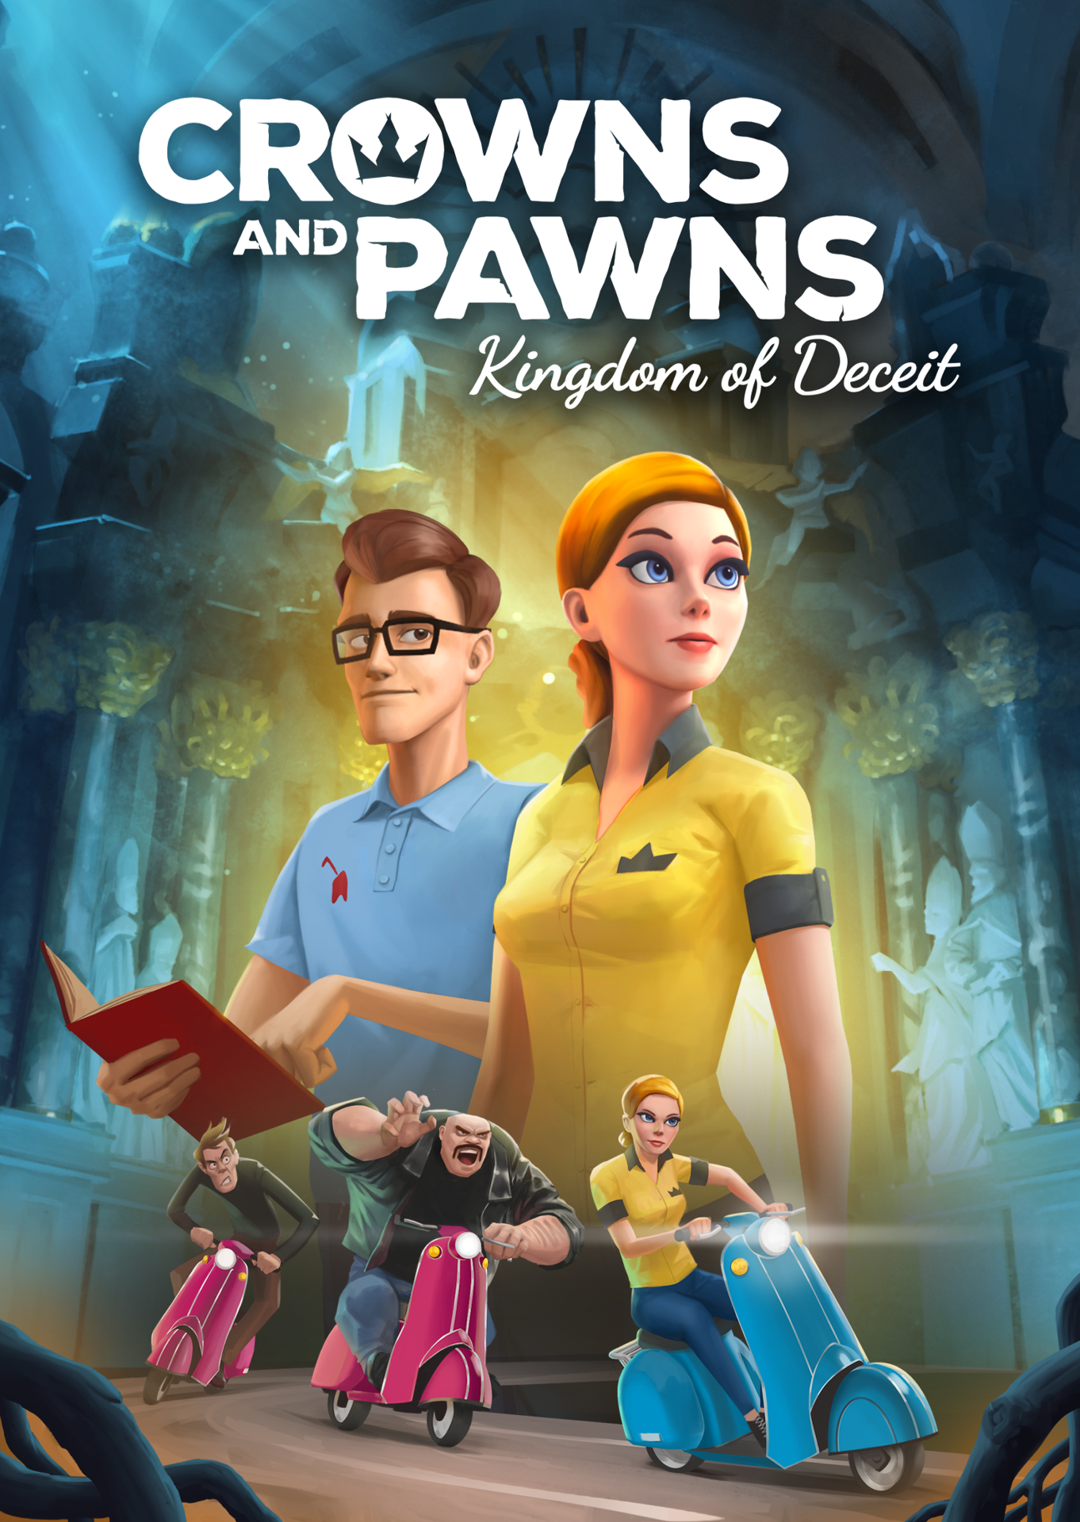 Crowns and Pawns: Kingdom of Deceit review